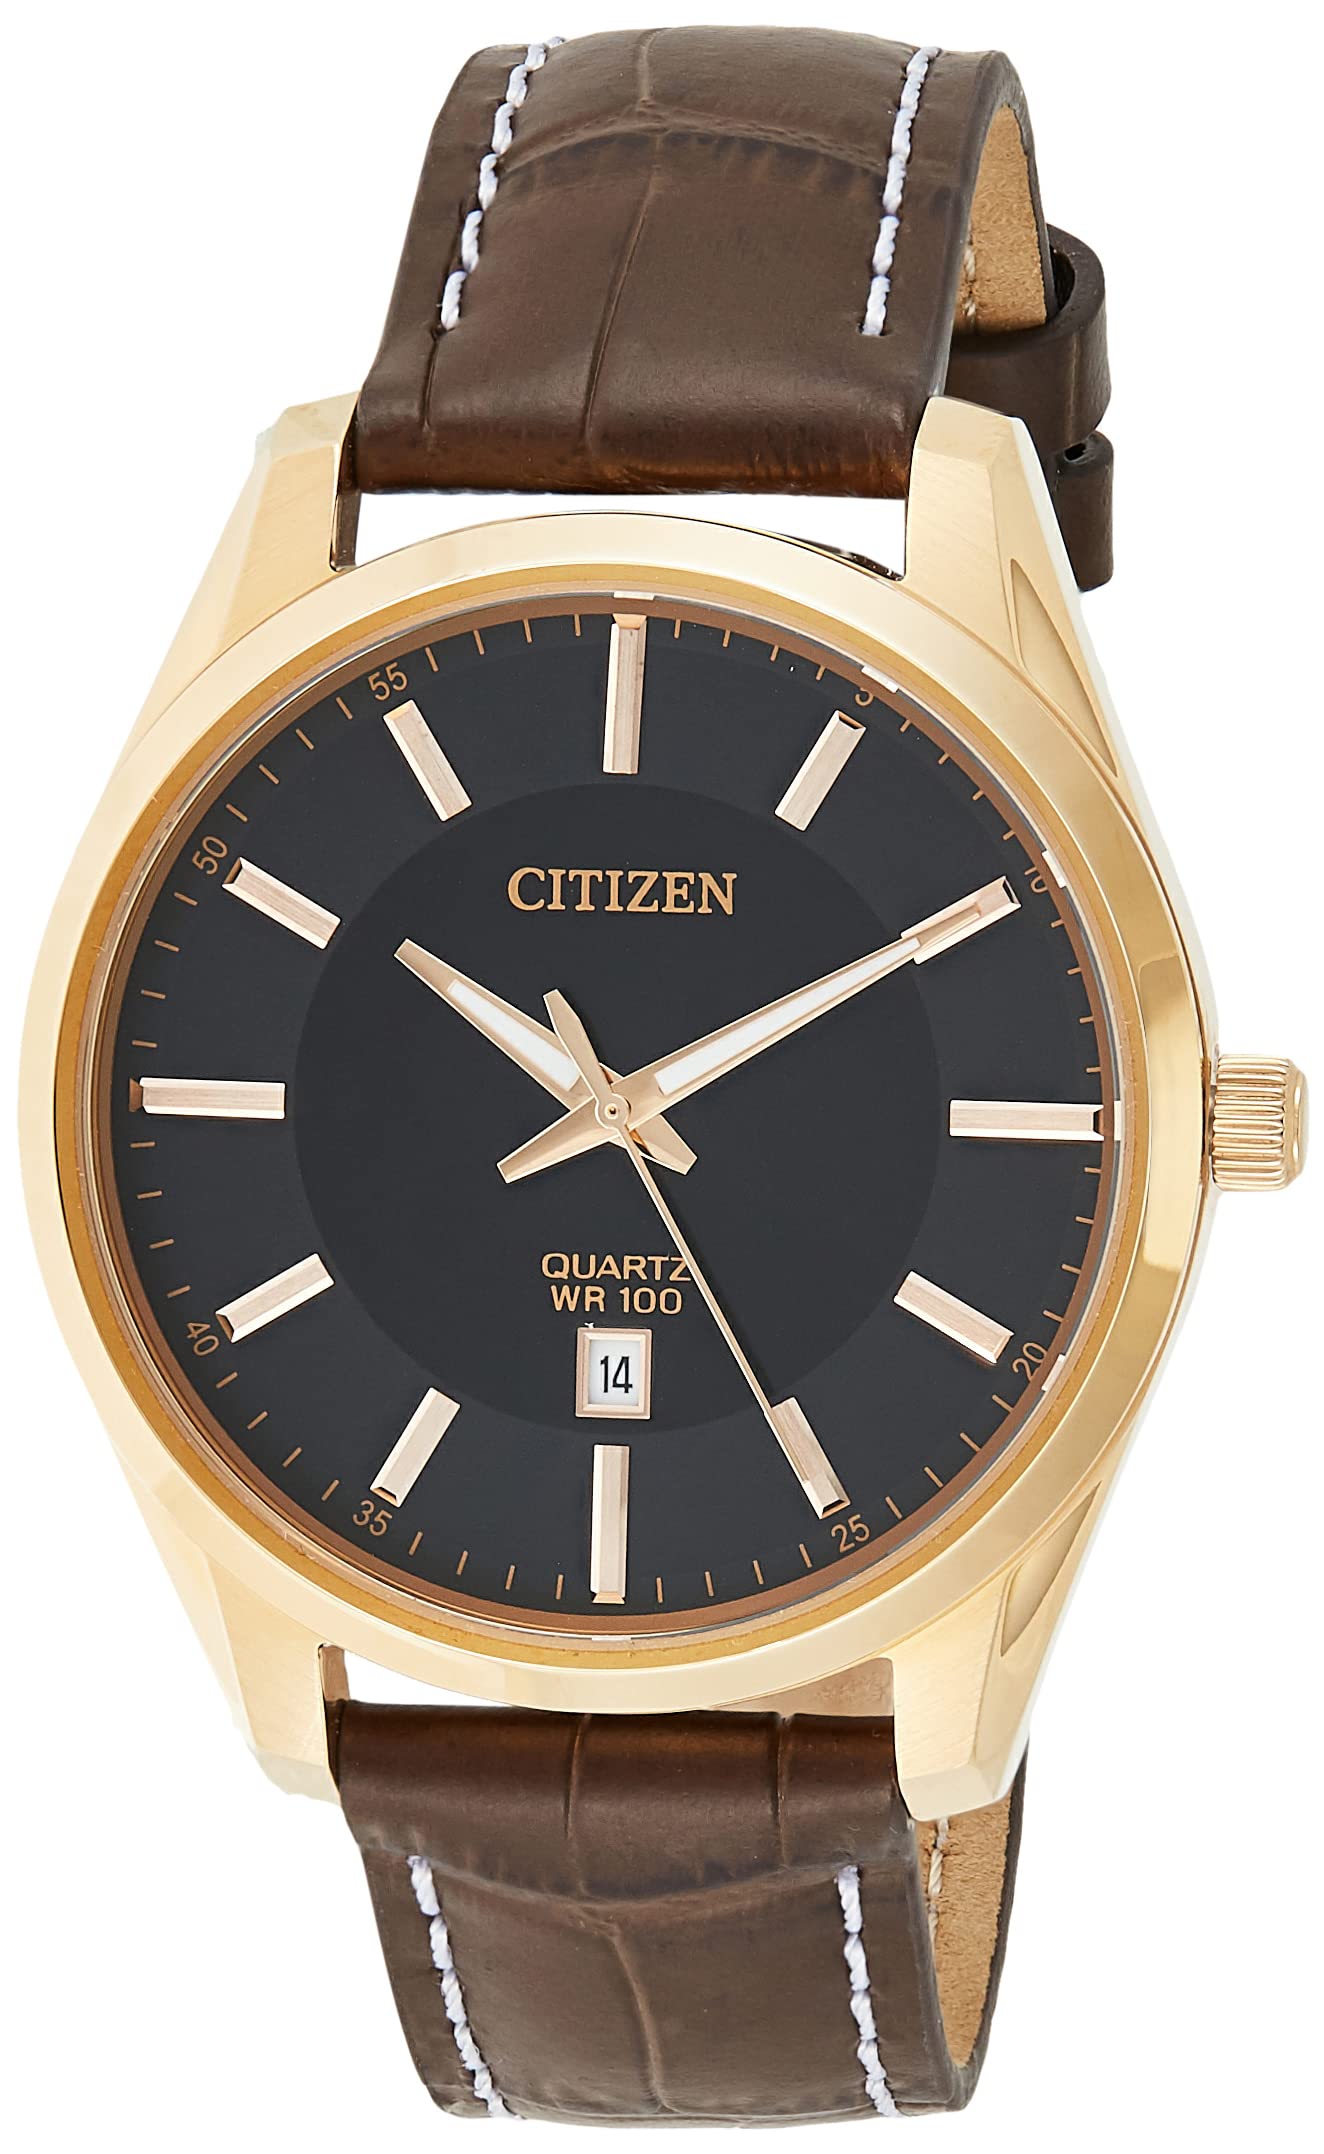 Citizen Quartz Mens Watch, Stainless Steel with Leather strap, Casual, Brown (Model: BI1033-04E)